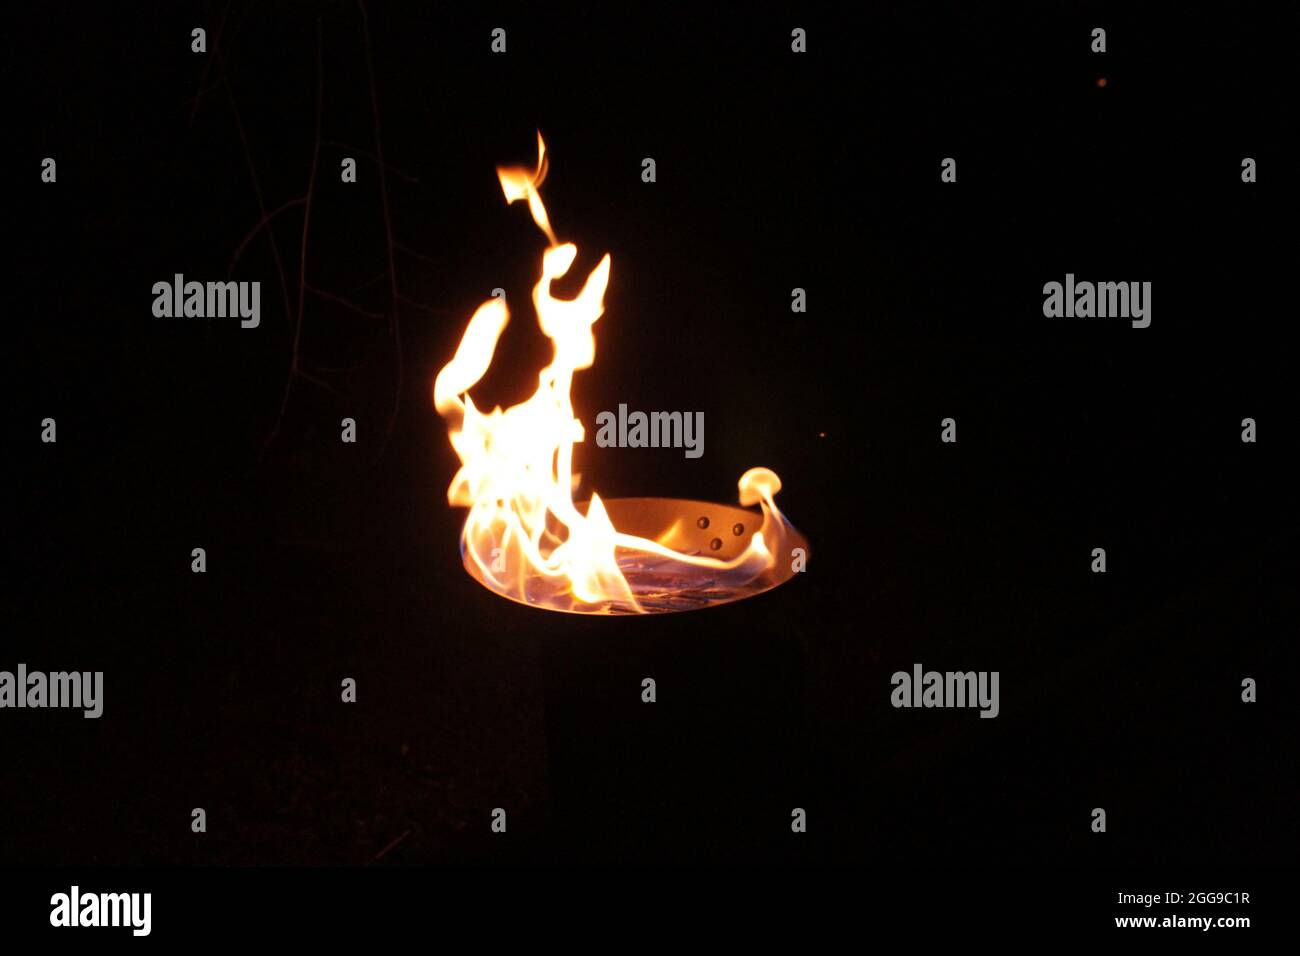 huge ethanol flame rising out of a skillet at night. Black background Stock Photo